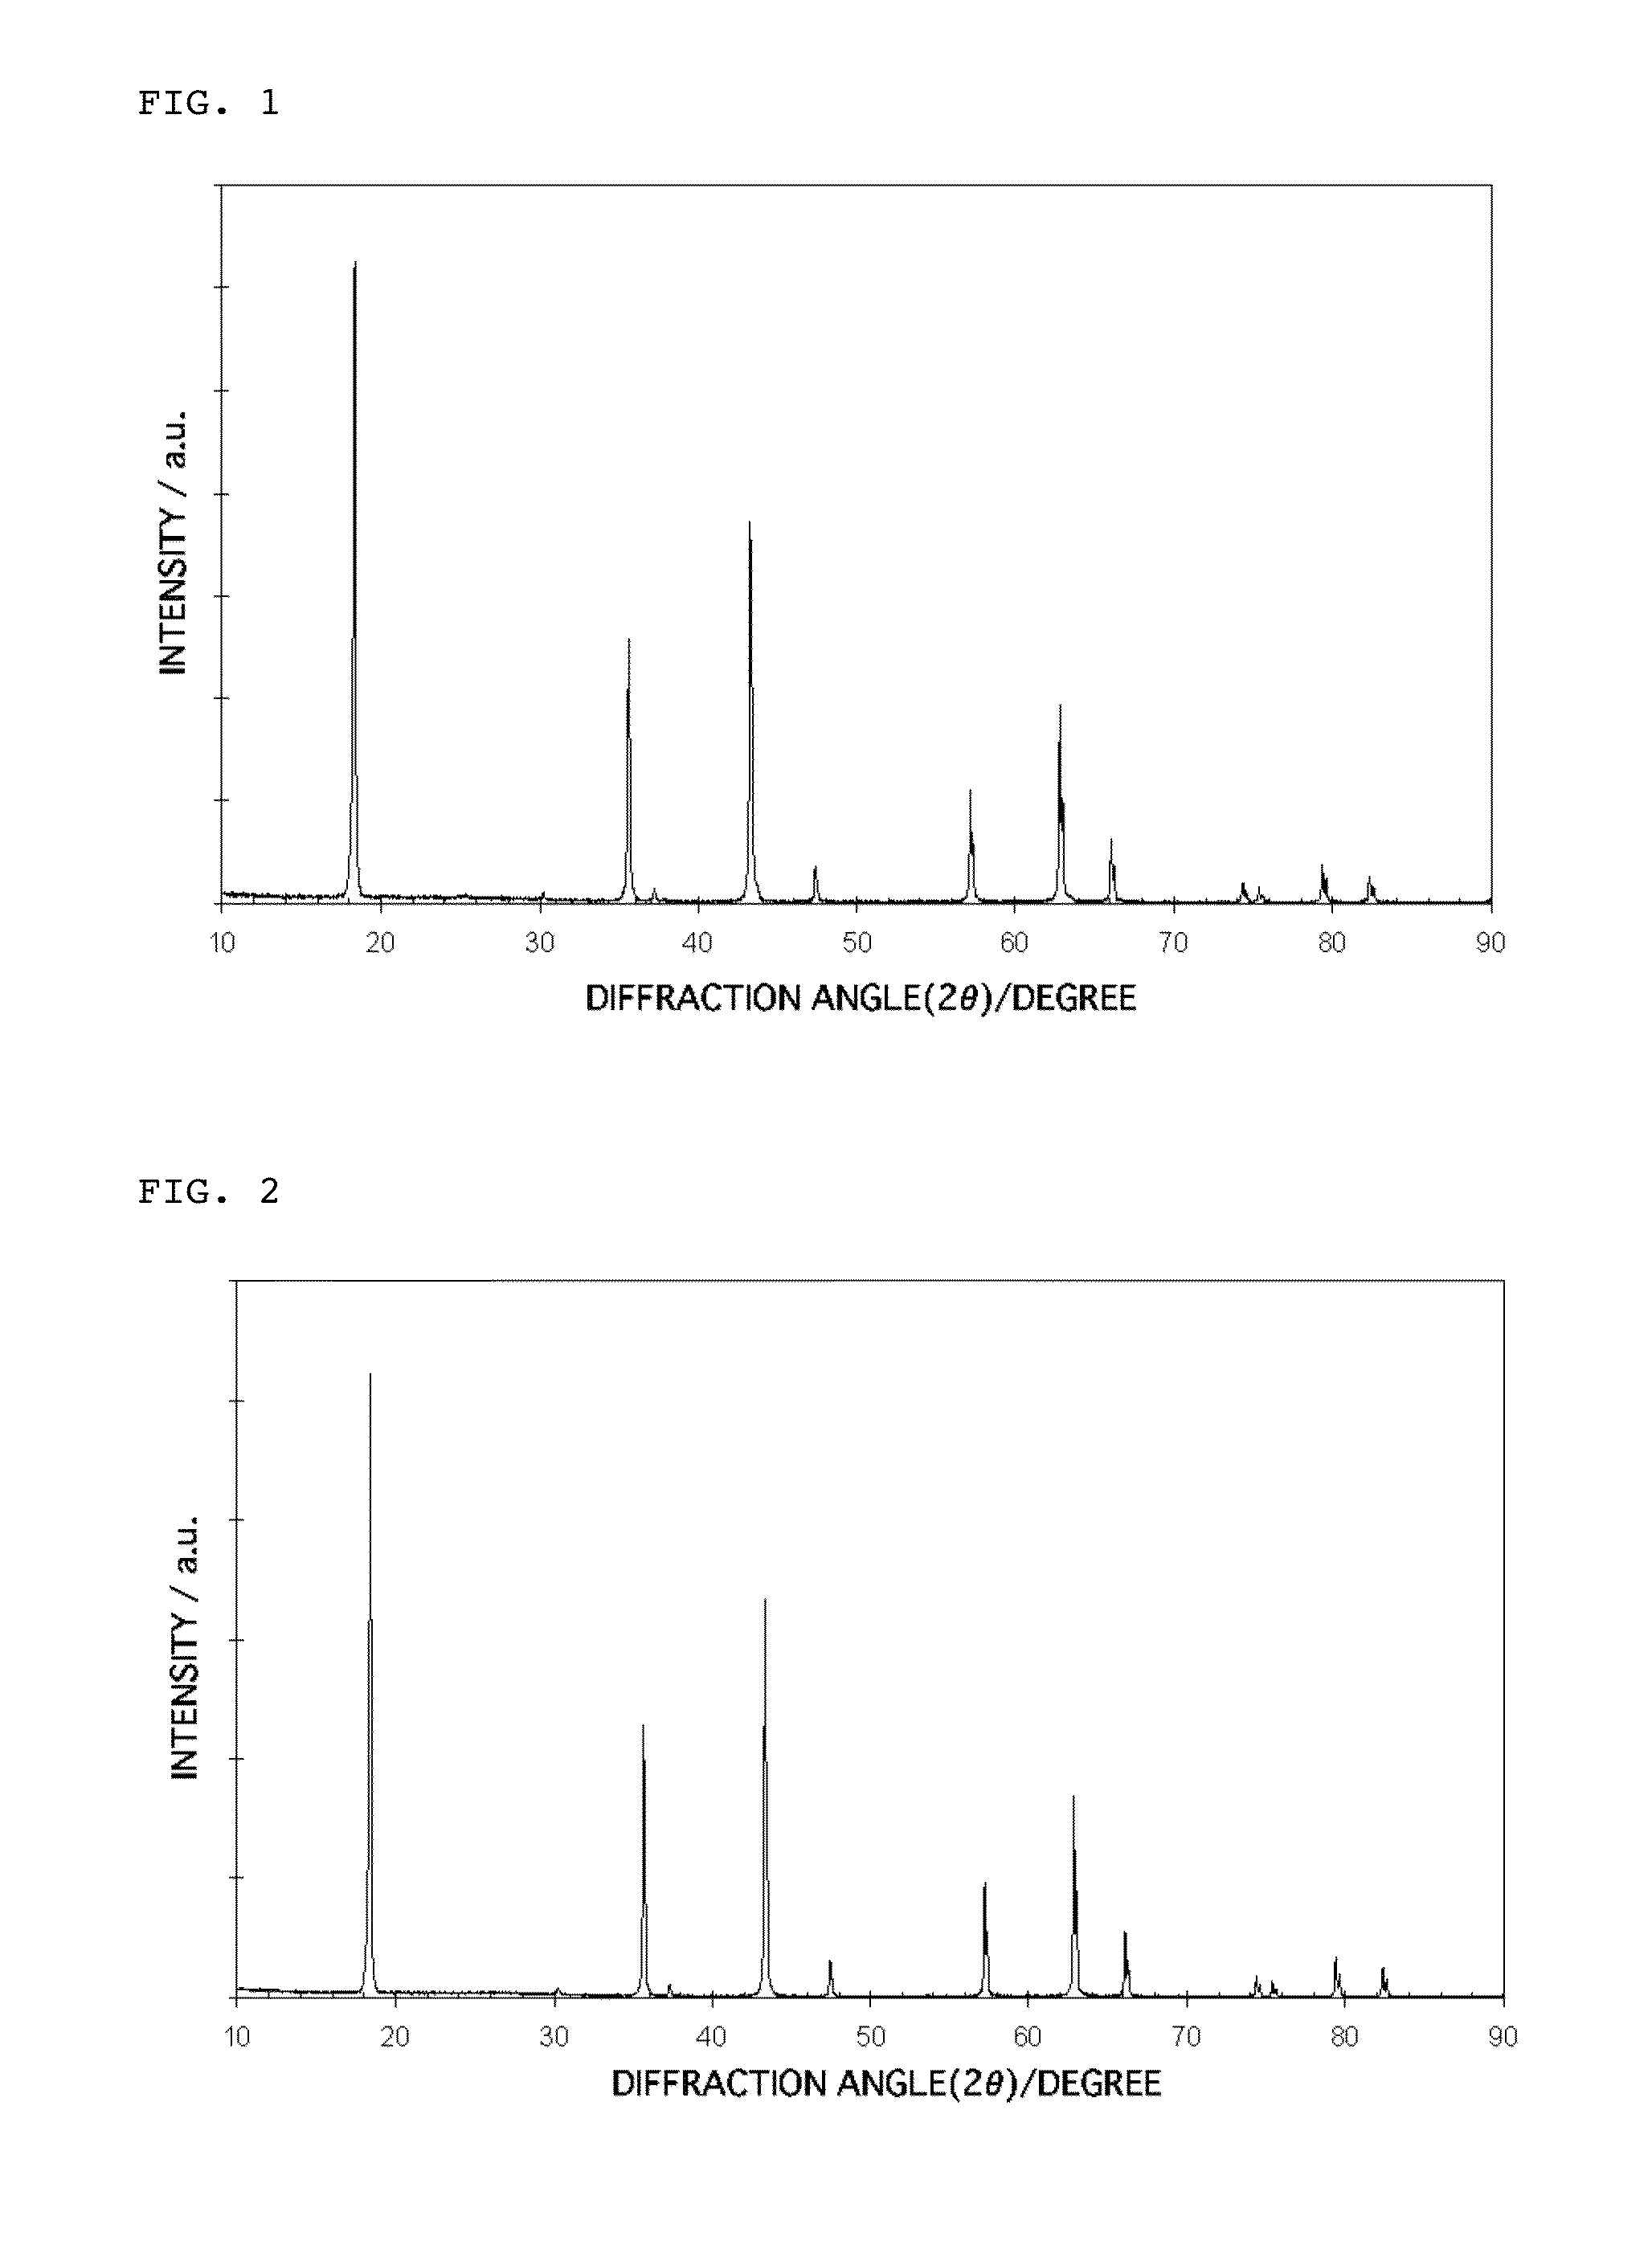 Lithium titanate particles and process for producing the lithium titanate particles, Mg-containing lithium titanate particles and process for producing the Mg-containing lithium titanate particles, negative electrode active substance particles for non-aqueous electrolyte secondary batteries, and non-aqueous electrolyte secondary battery